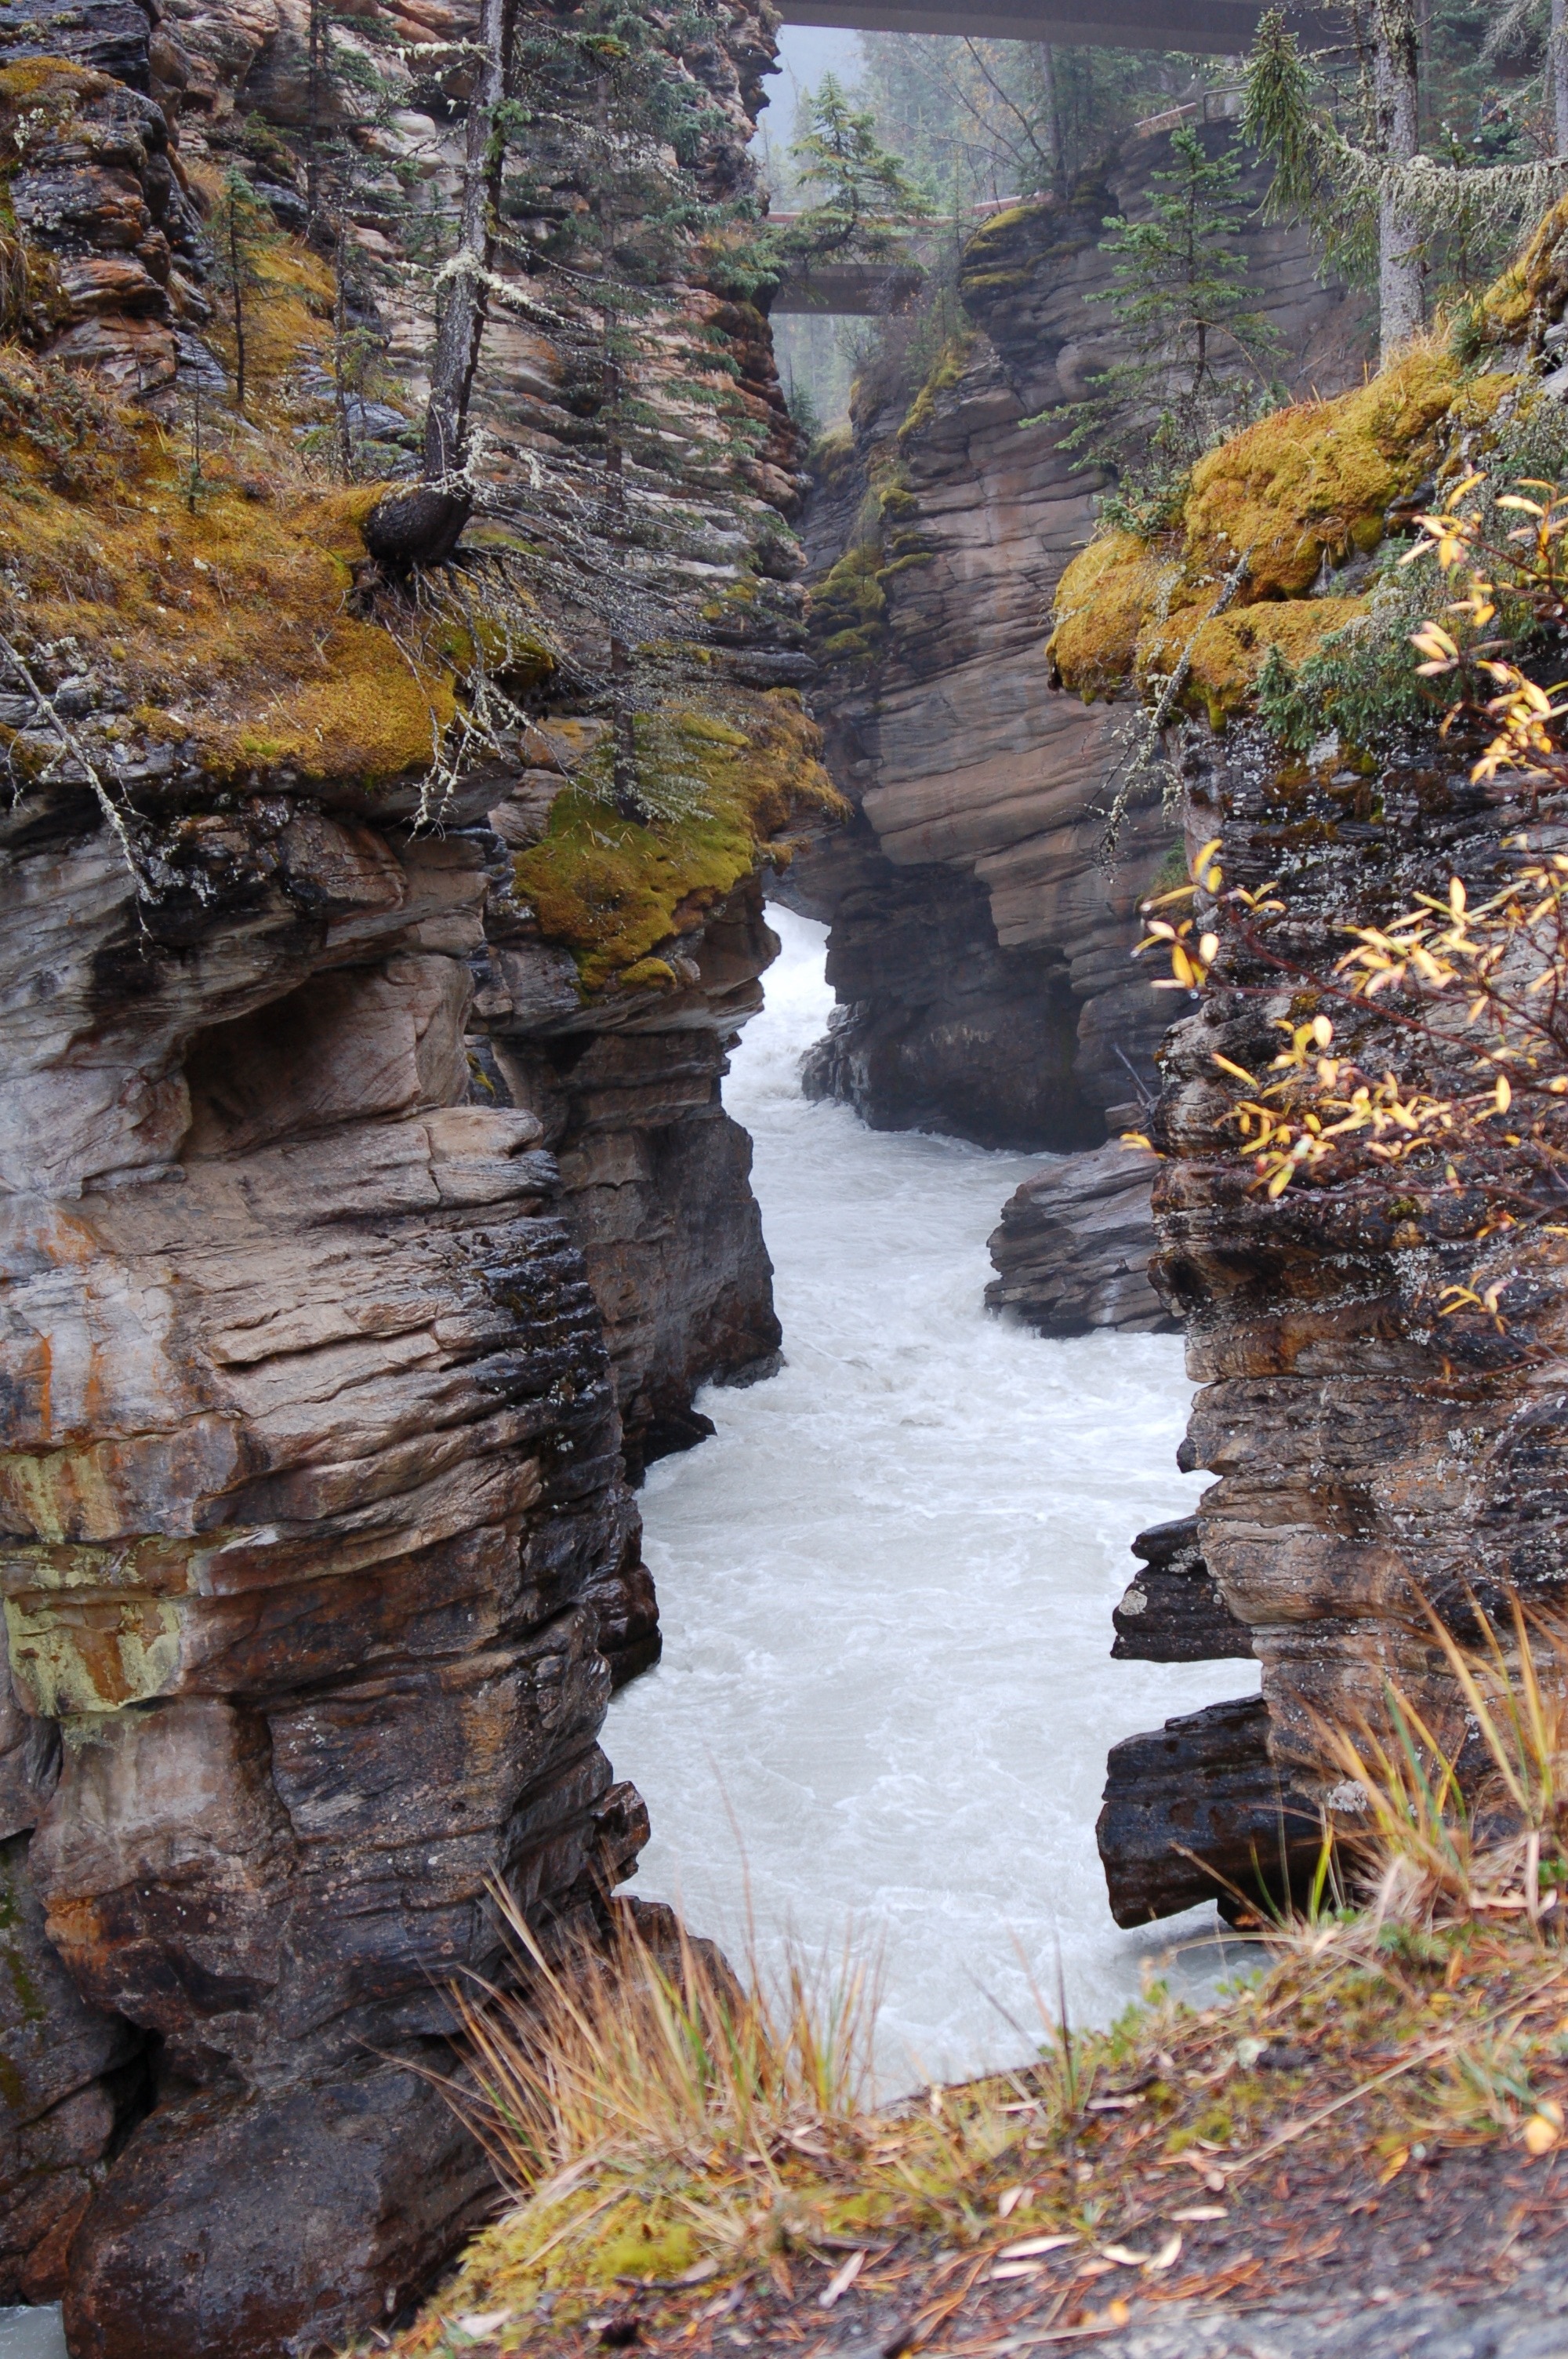 Canyon, River, Gorge, Stream, Landscape, nature, rock - object